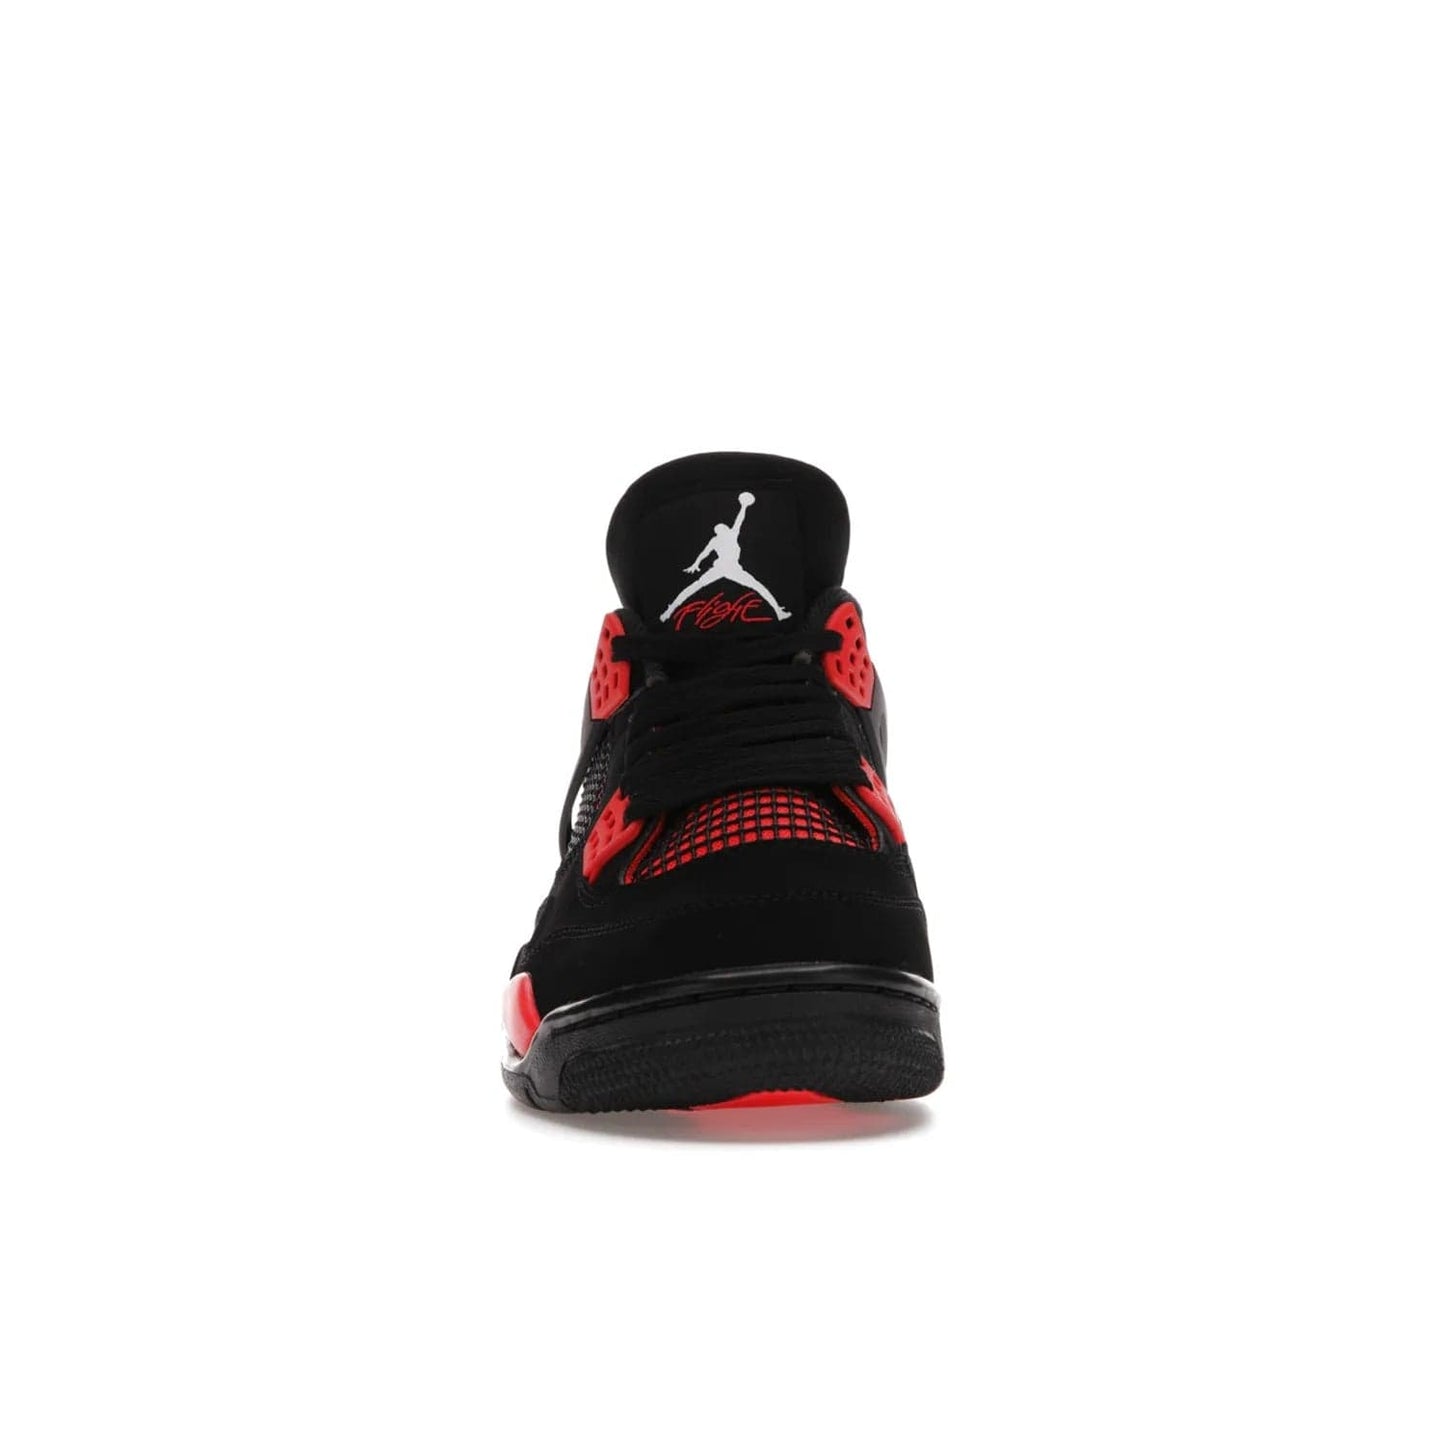 Jordan 4 Retro Red Thunder - Image 10 - Only at www.BallersClubKickz.com - Upscale your footwear with the Air Jordan 4 Retro Red Thunder. Featuring a Durabuck upper, red underlays, signature Flight patch, and vibrant red midsole, this retro sneaker adds style and edge. Releases in January 2022.